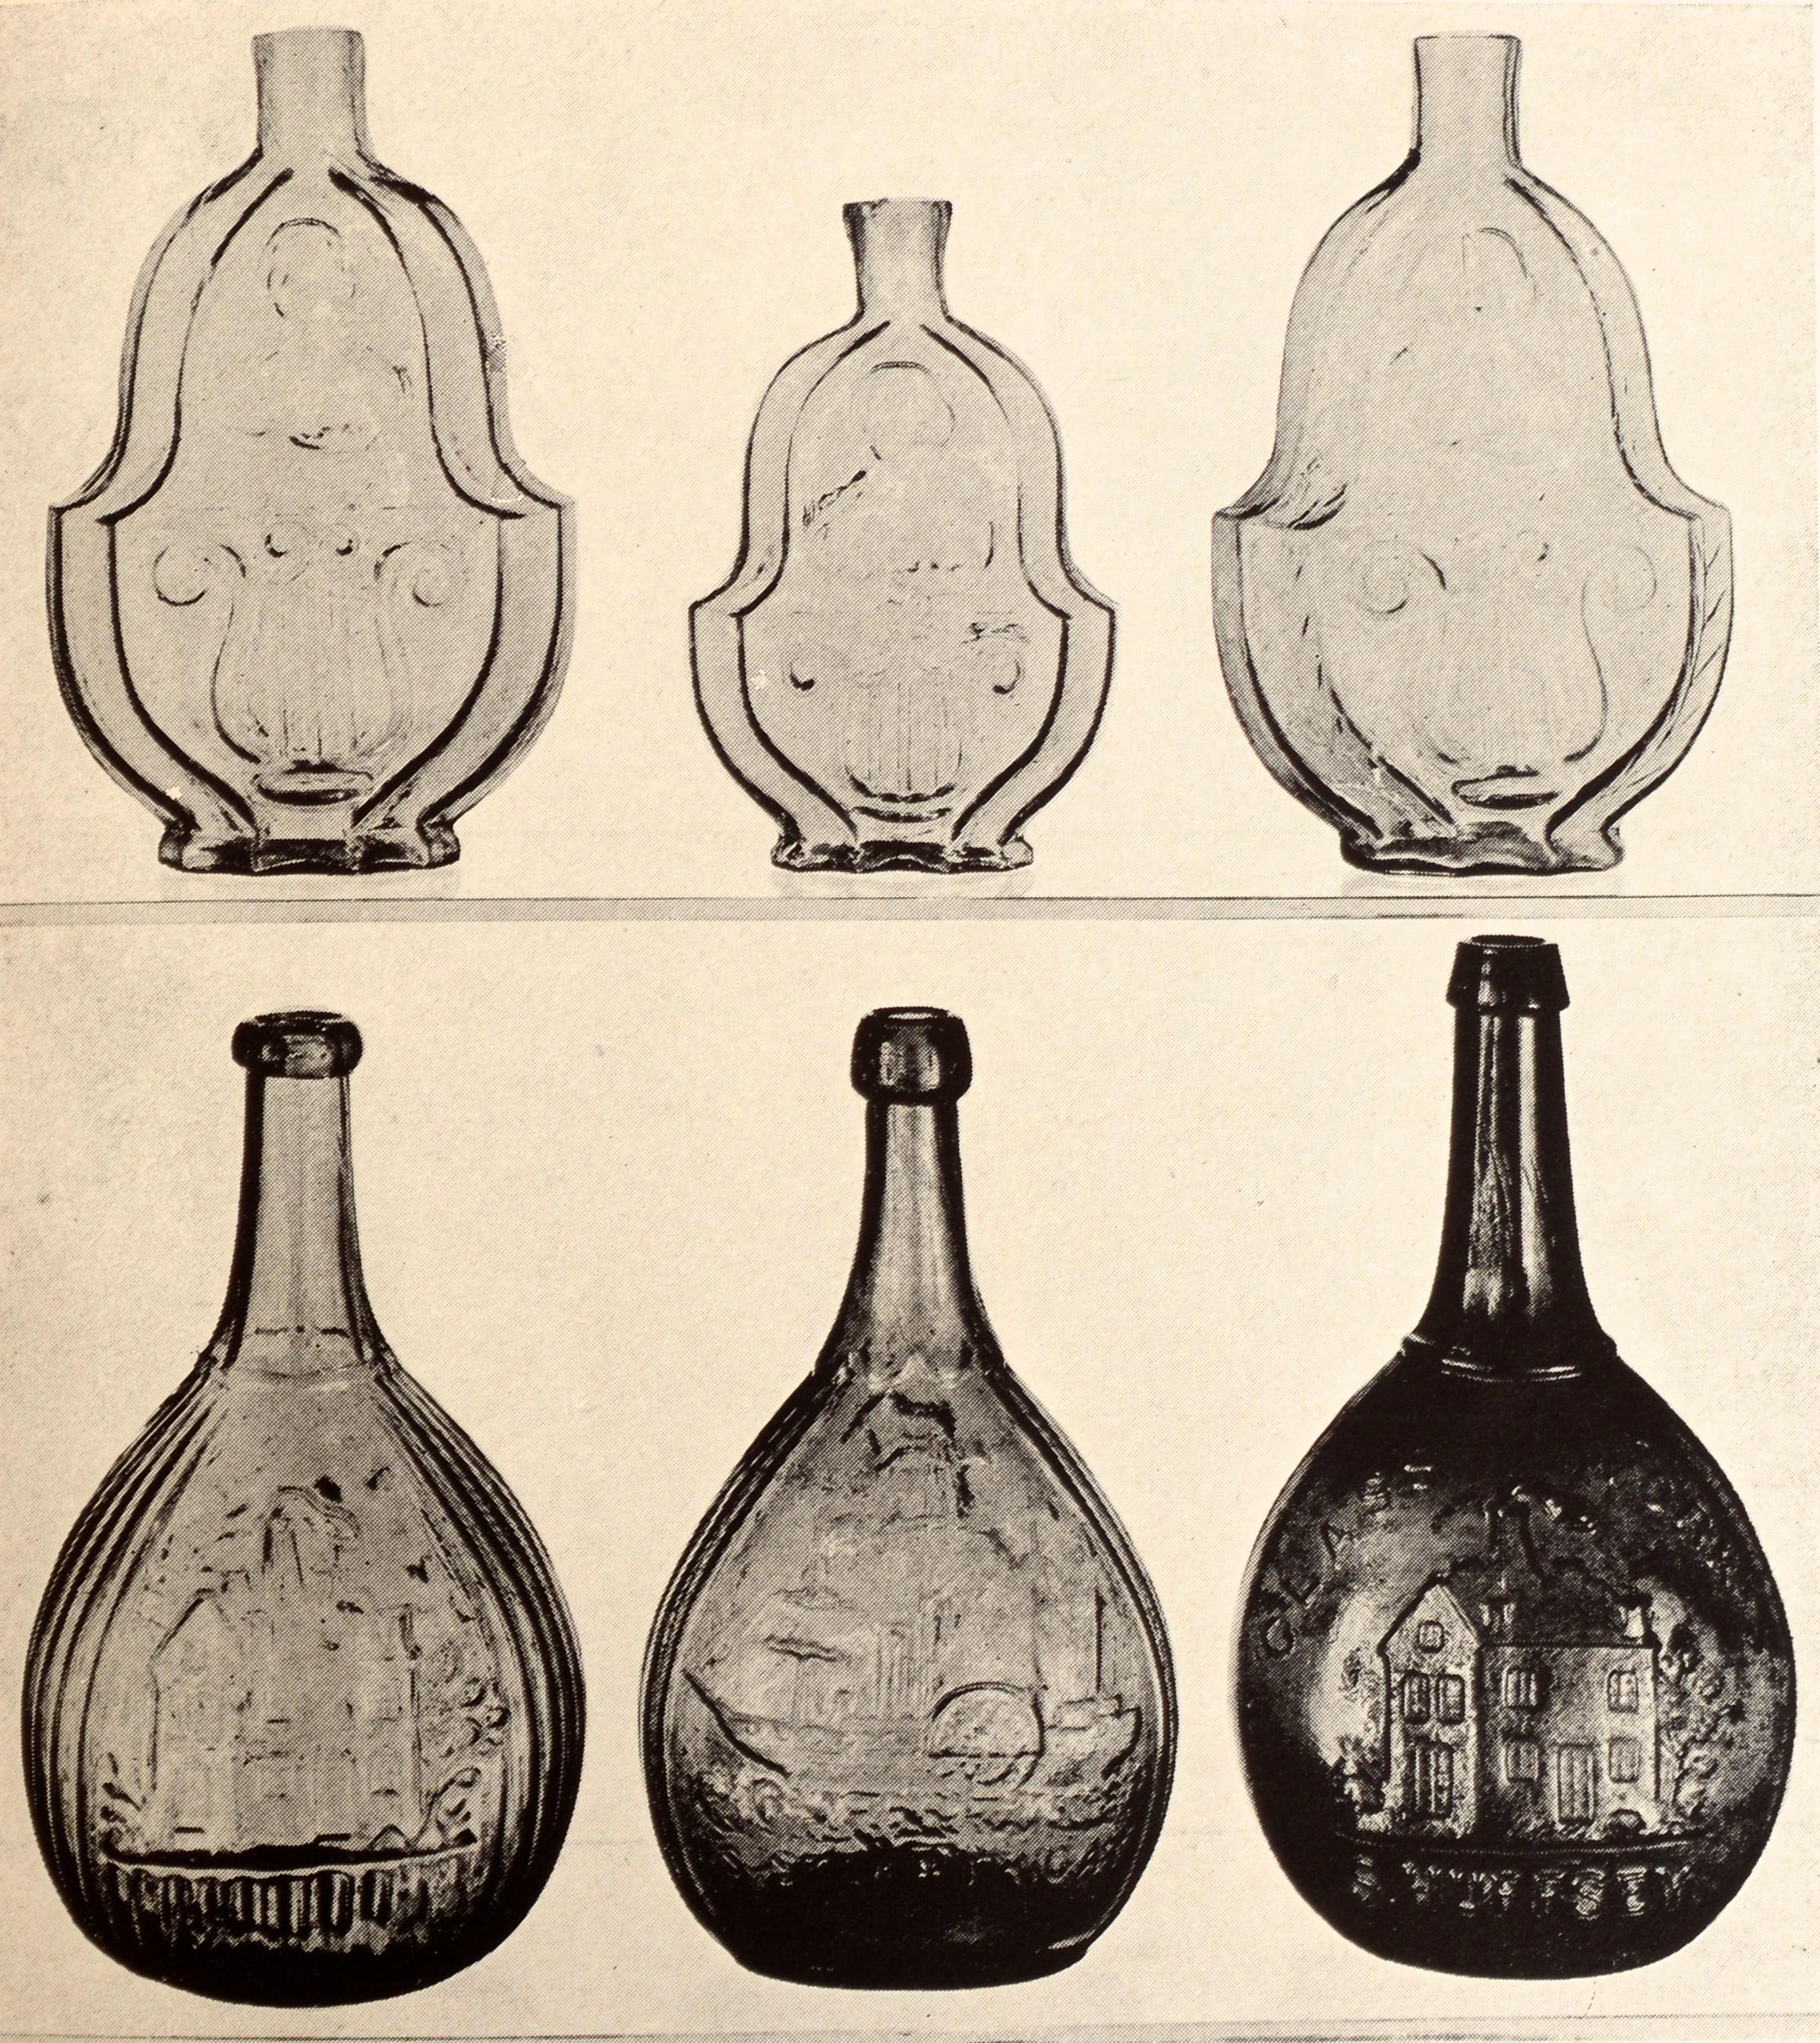 Early American Bottles & Flasks and Other Rare American Glass Collected by the Late Alfred B. Maclay. Parke-Bernet NY softcover auction catalog. 504 lots, nicely illustrated and described. Hard to find subject. 
We are division of N.P. Trent